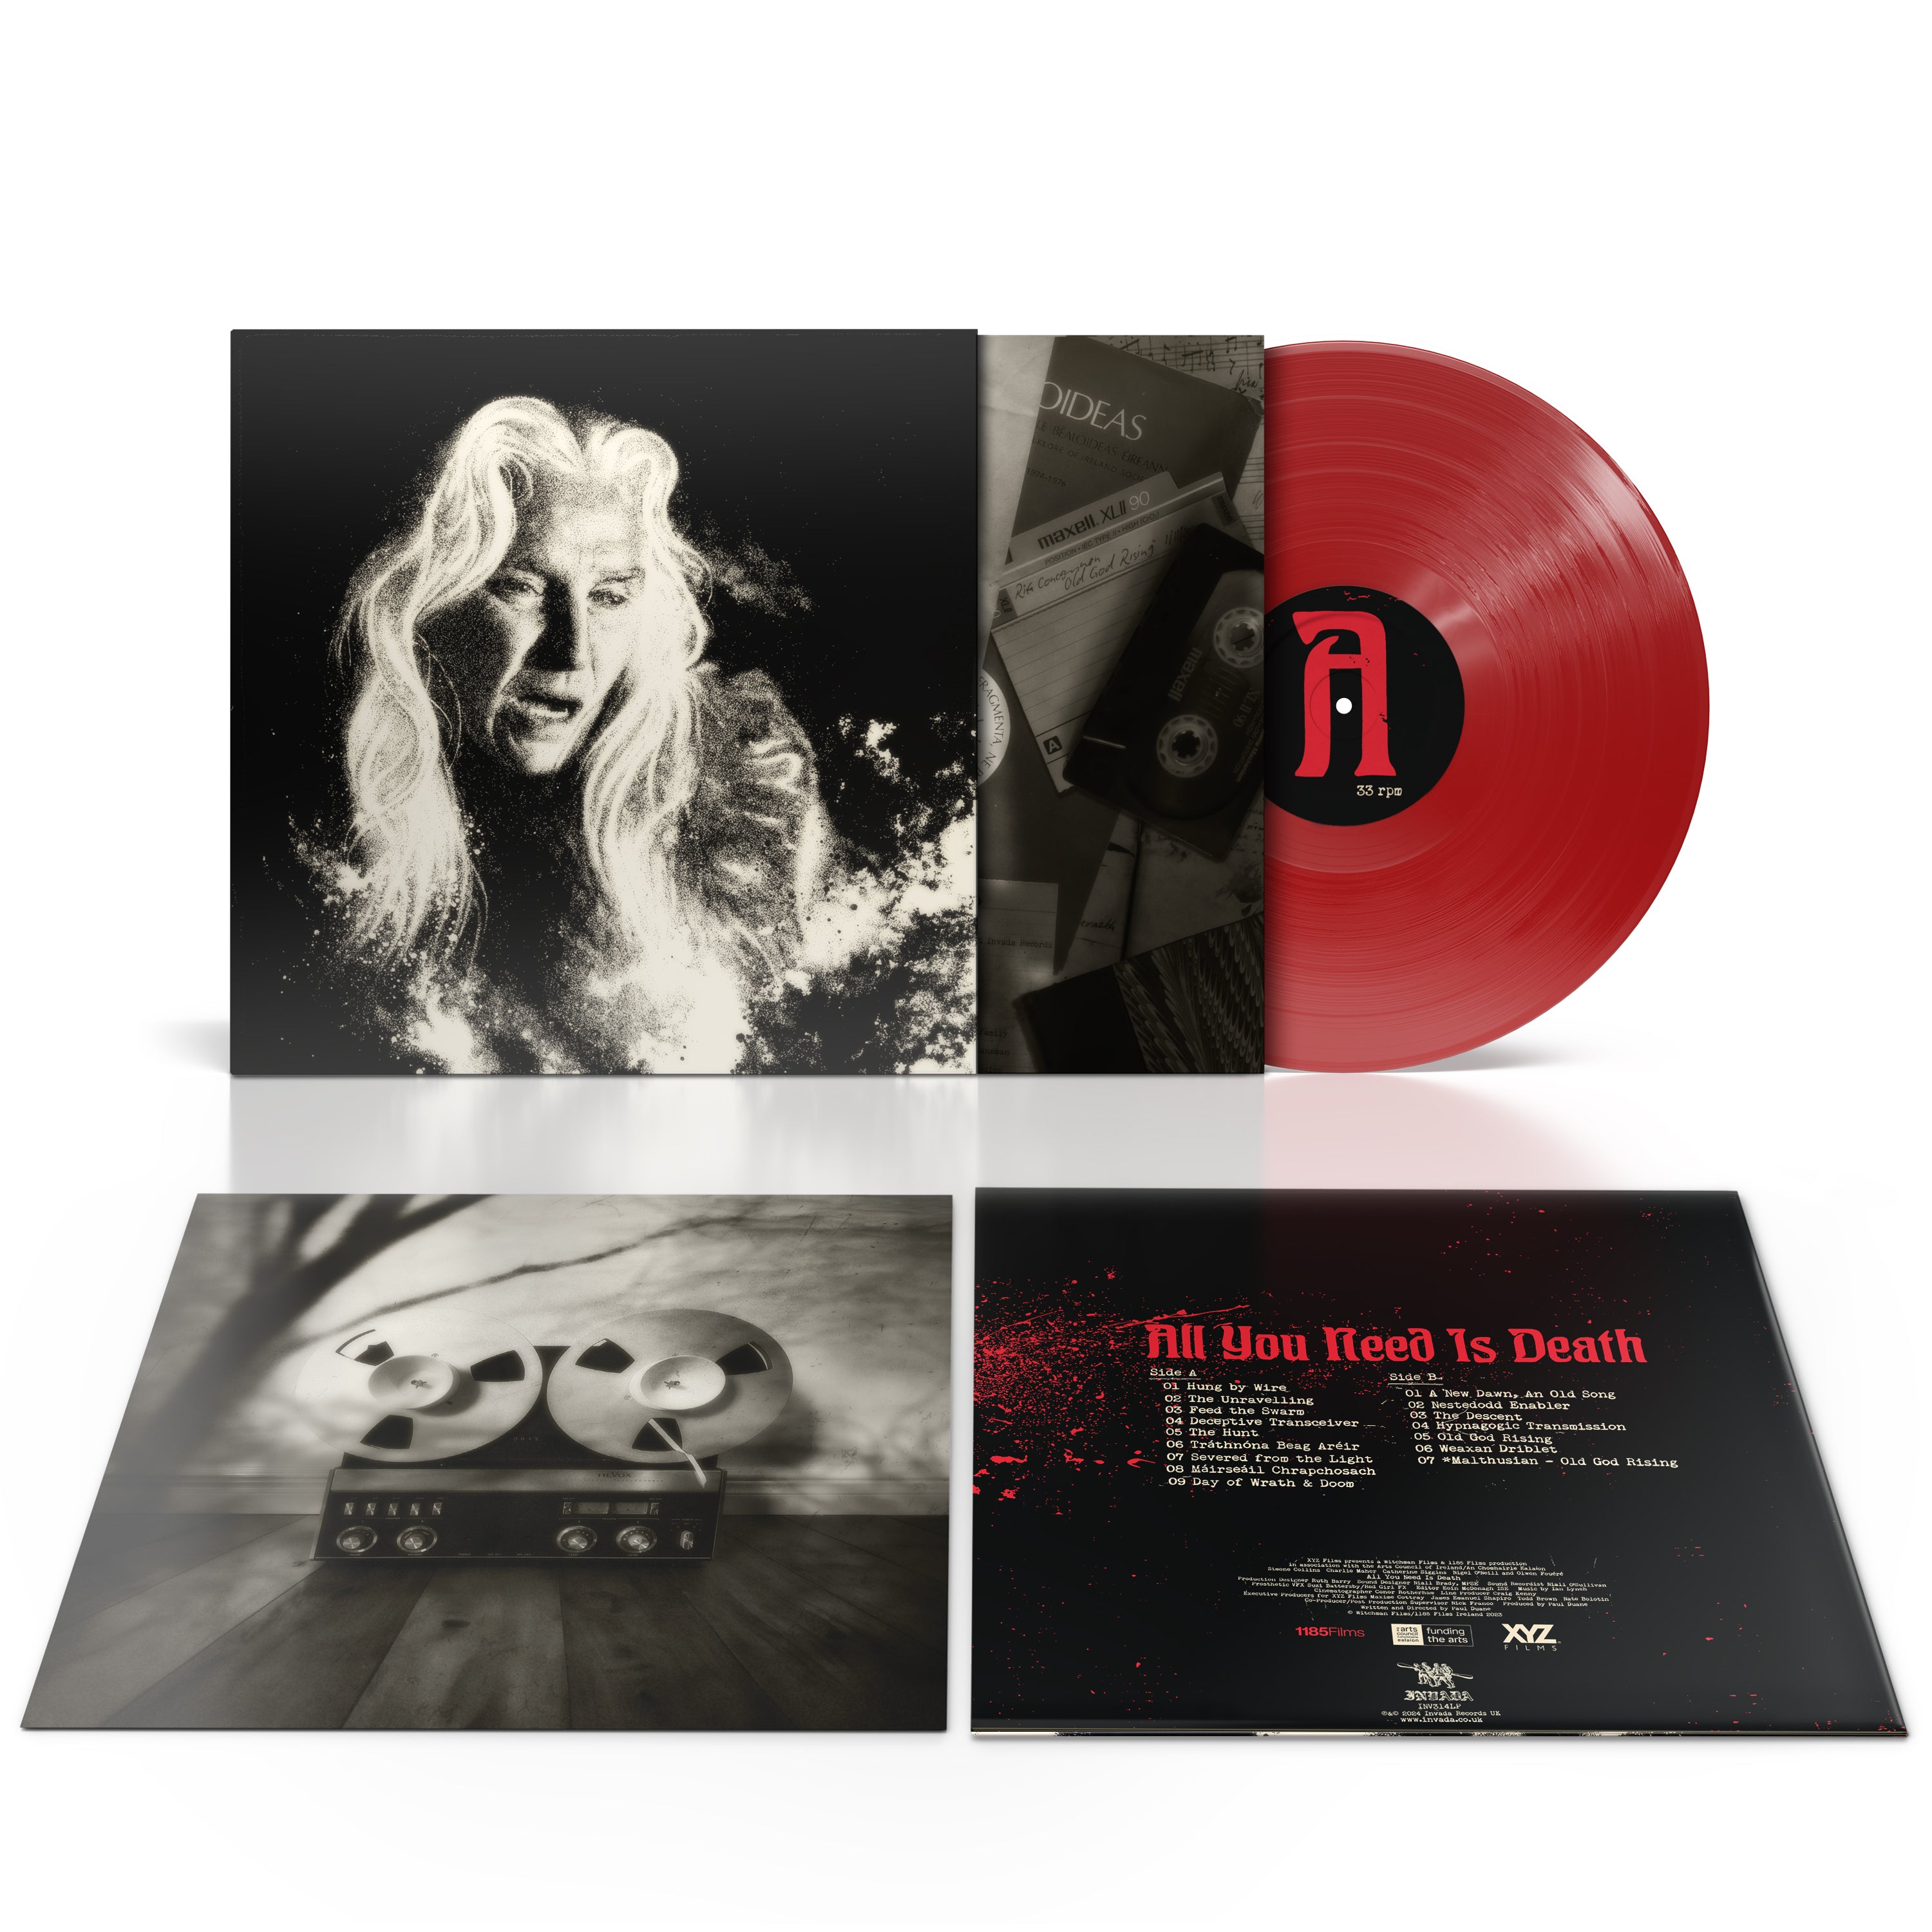 Ian Lynch - All You Need Is Death (OST): Limited Red Vinyl LP